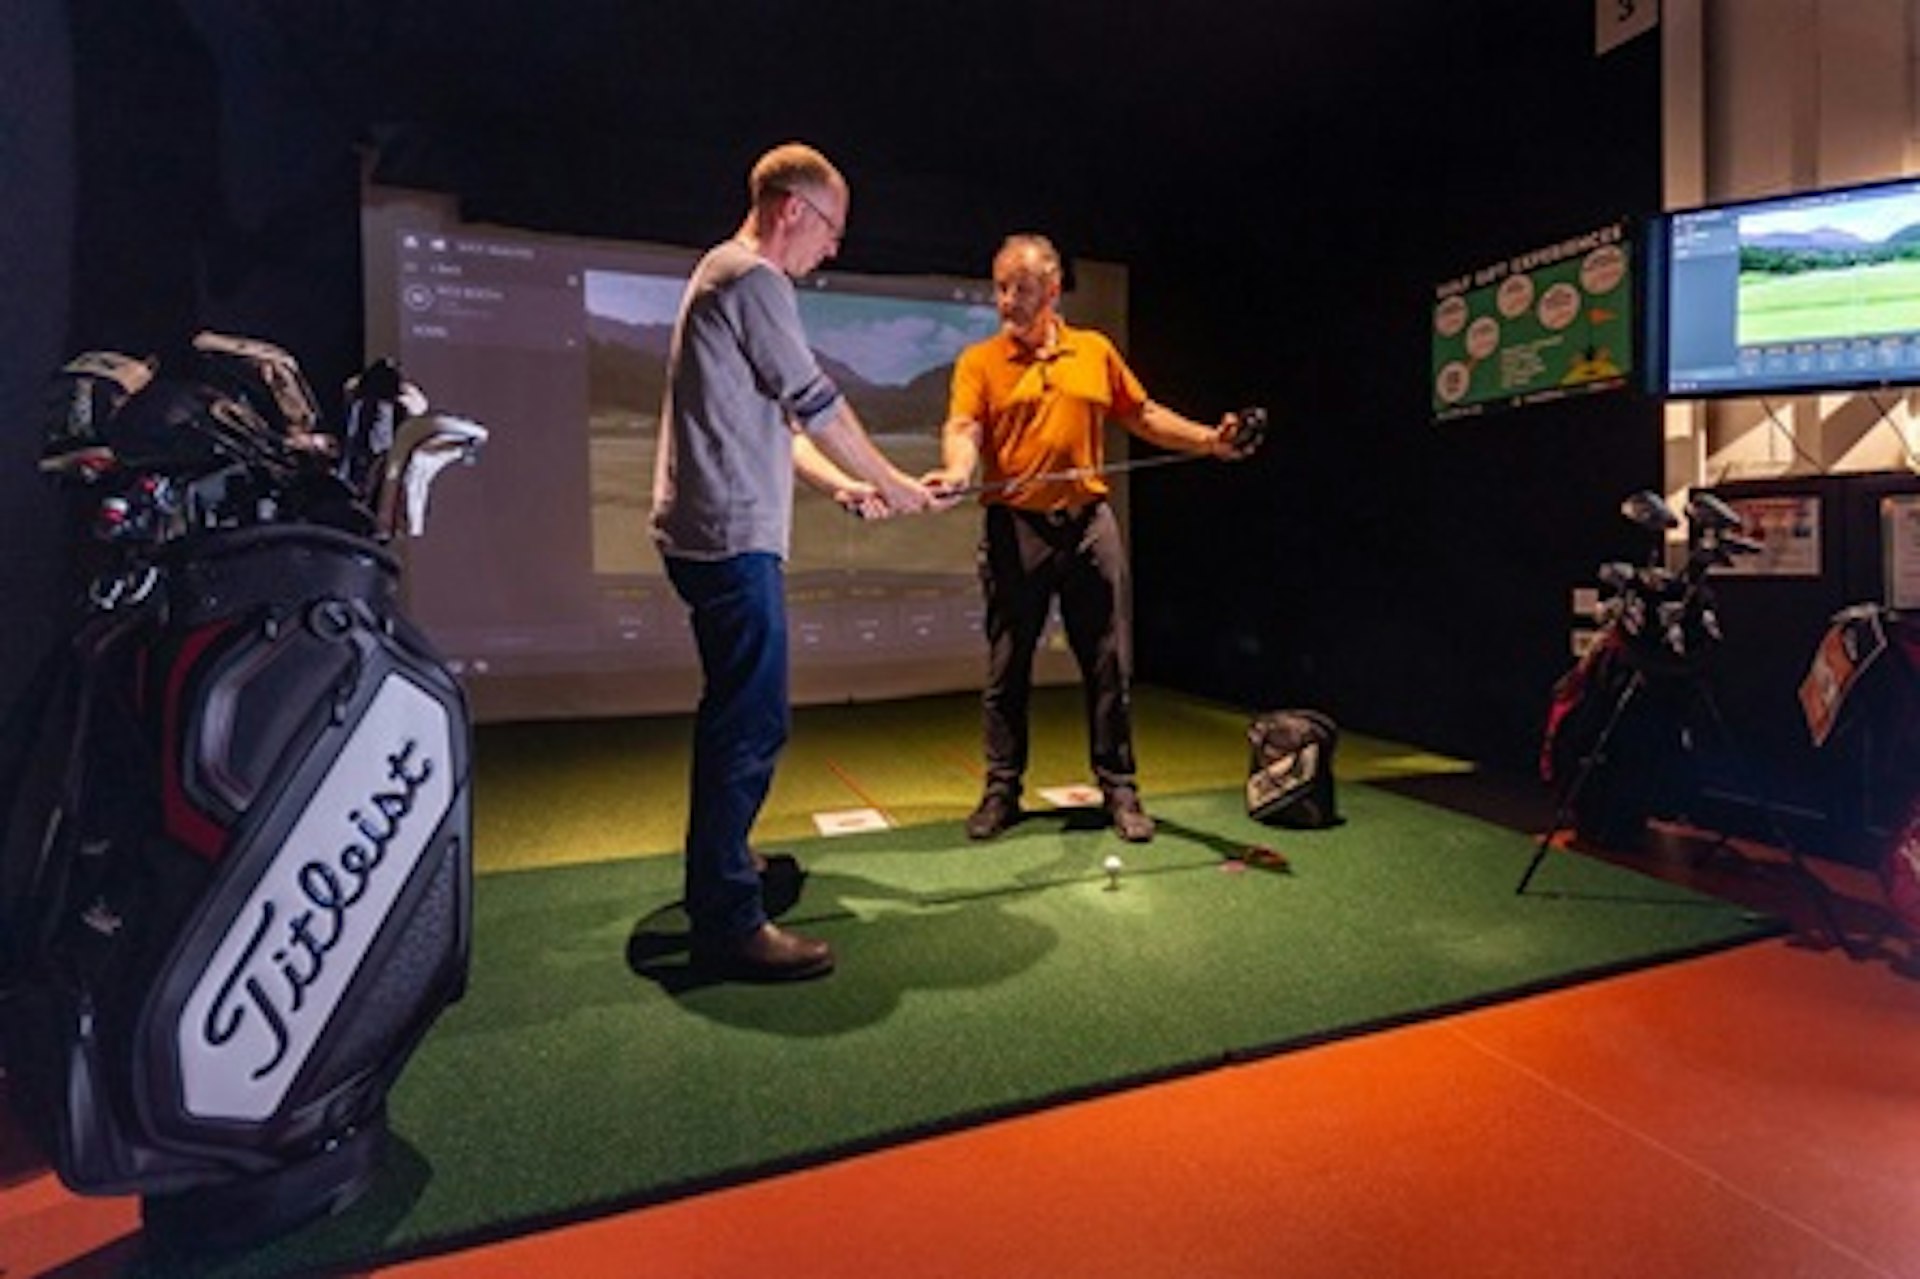 30 minute Golf Lesson with an Advanced PGA Professional Golfer at the St. Andrews Indoor Golf Centre 2